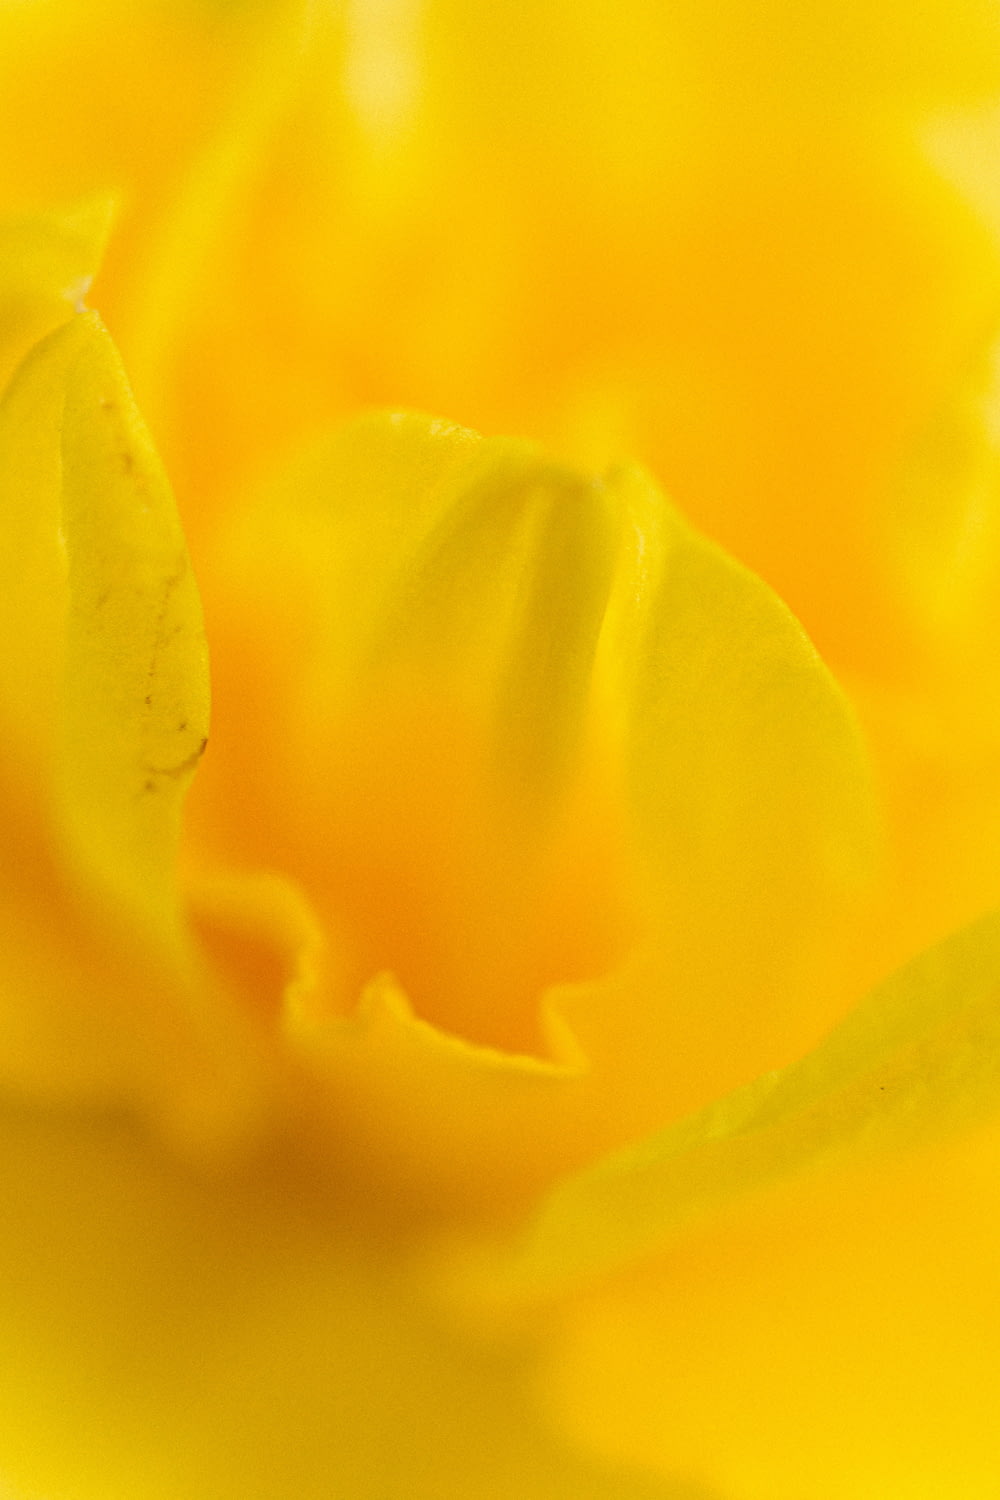 a close up view of a yellow flower